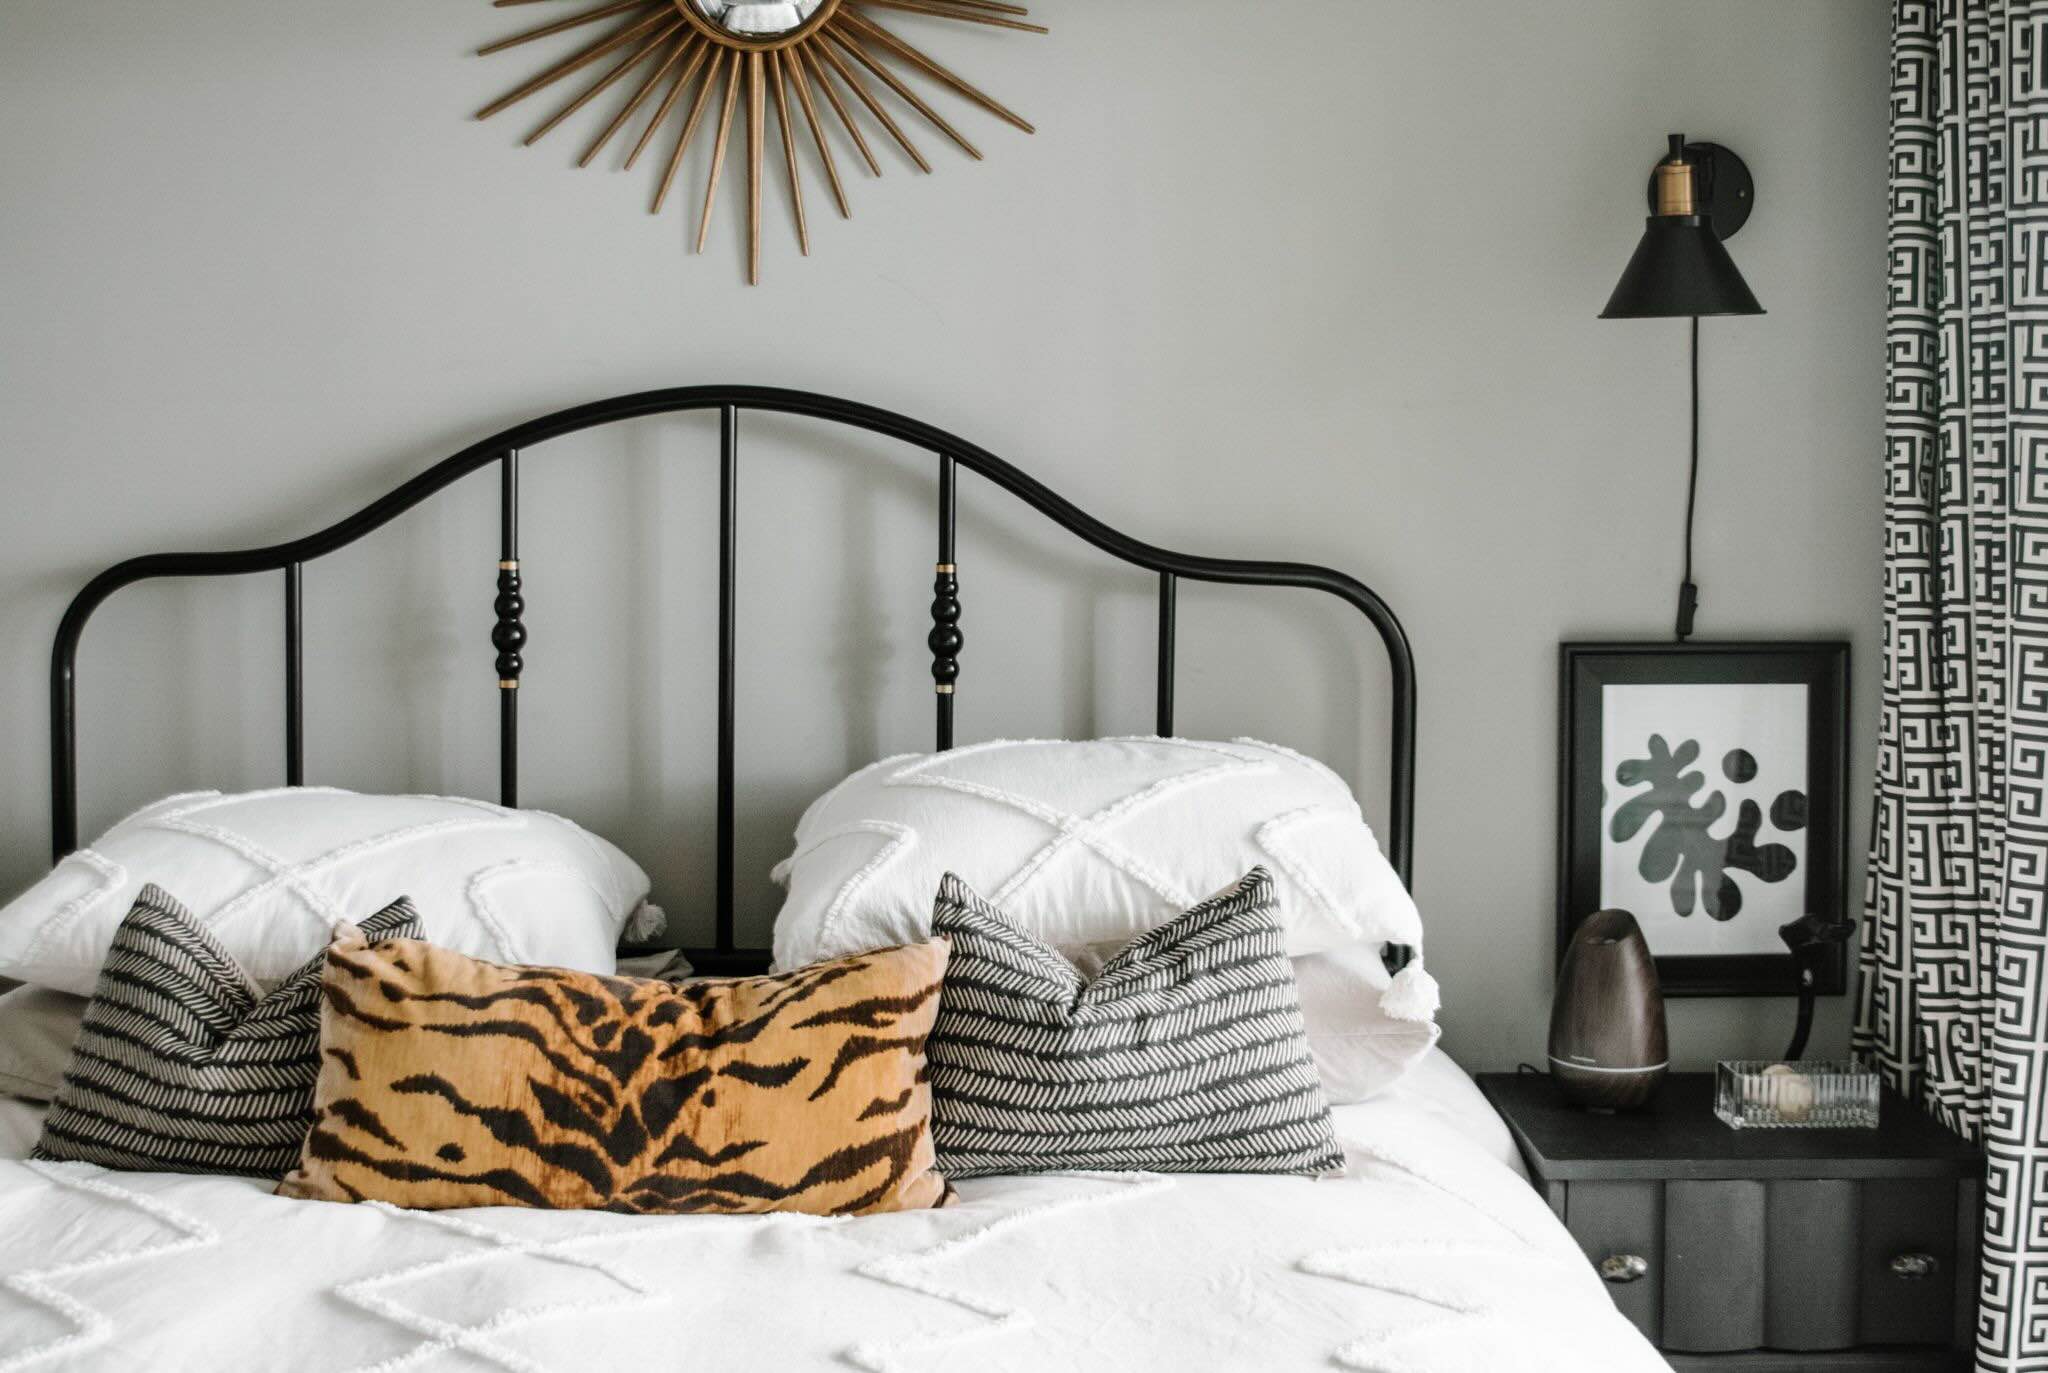 How To Improve The Appearance Of A Metal Bed Frame